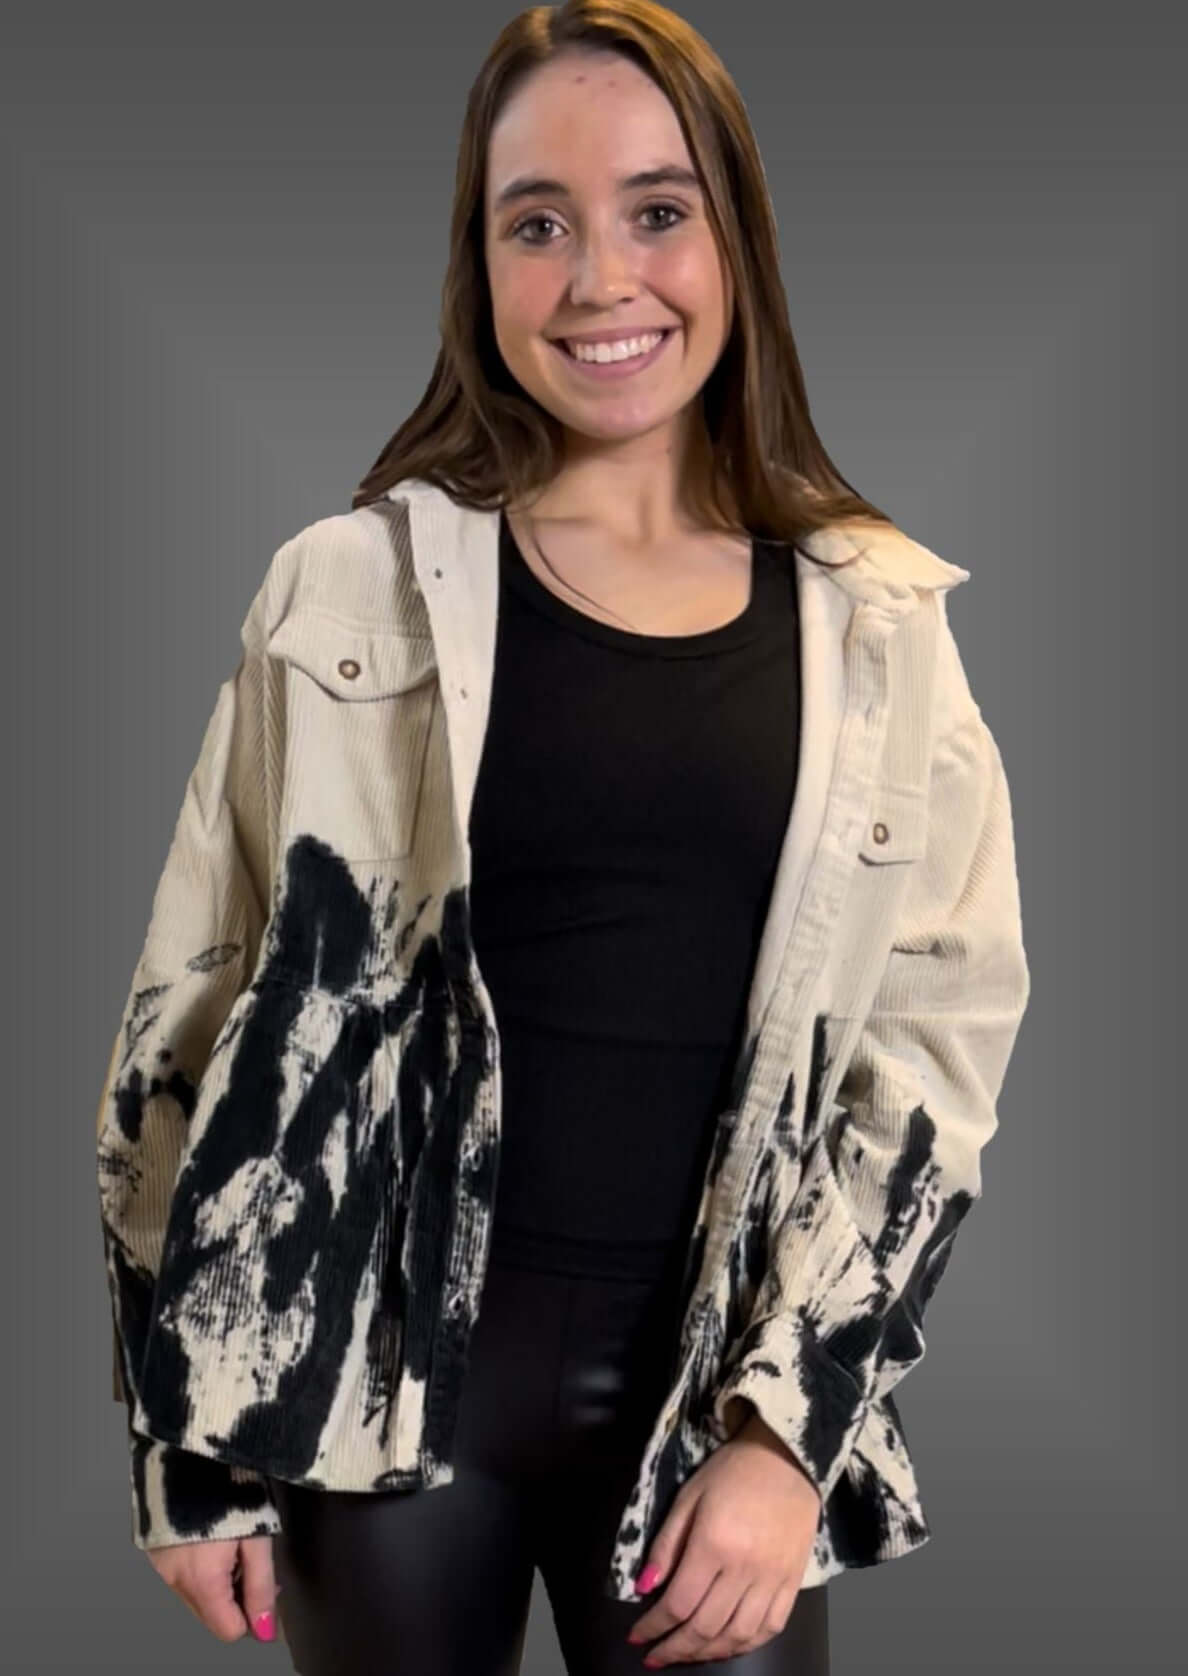 Made in USA Corduroy Button Down Tie Dye Tan & Black Jacket | Style# T70265-02 | Brand: Blue Buttercup | Classy Cozy Cool Women's Clothing Boutique